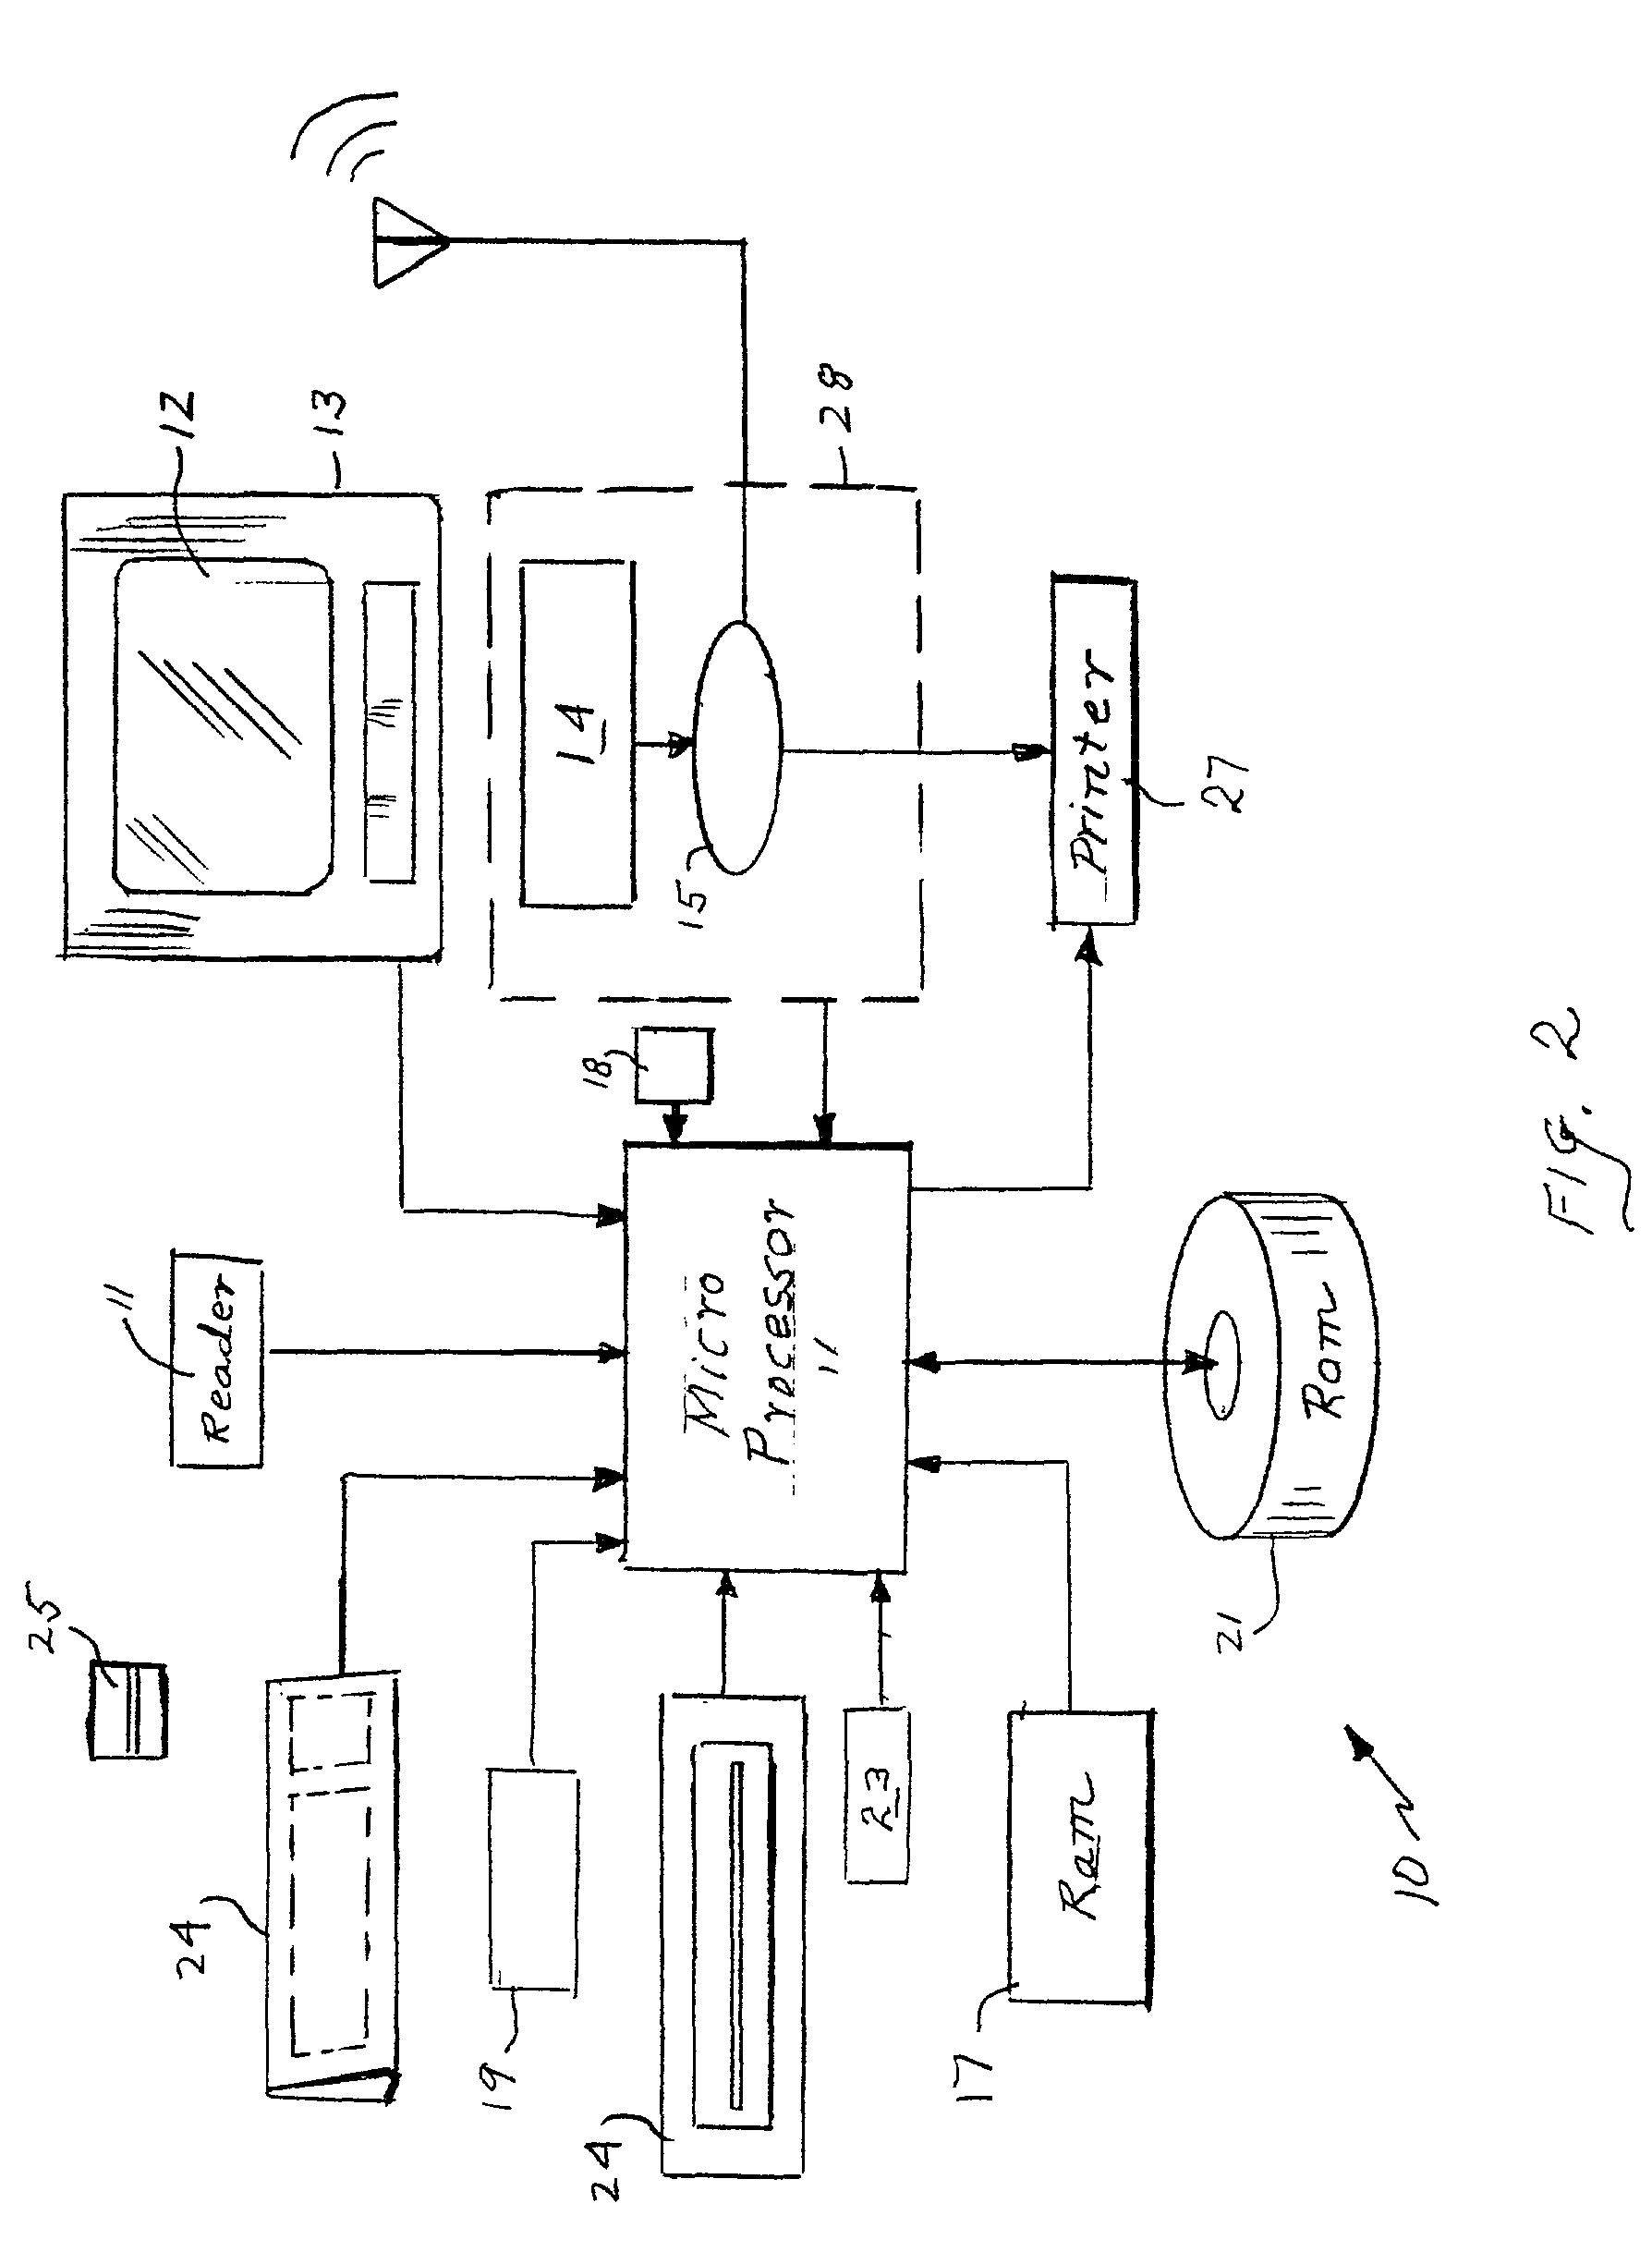 Methods and systems for providing personalized information to users in a commercial establishment